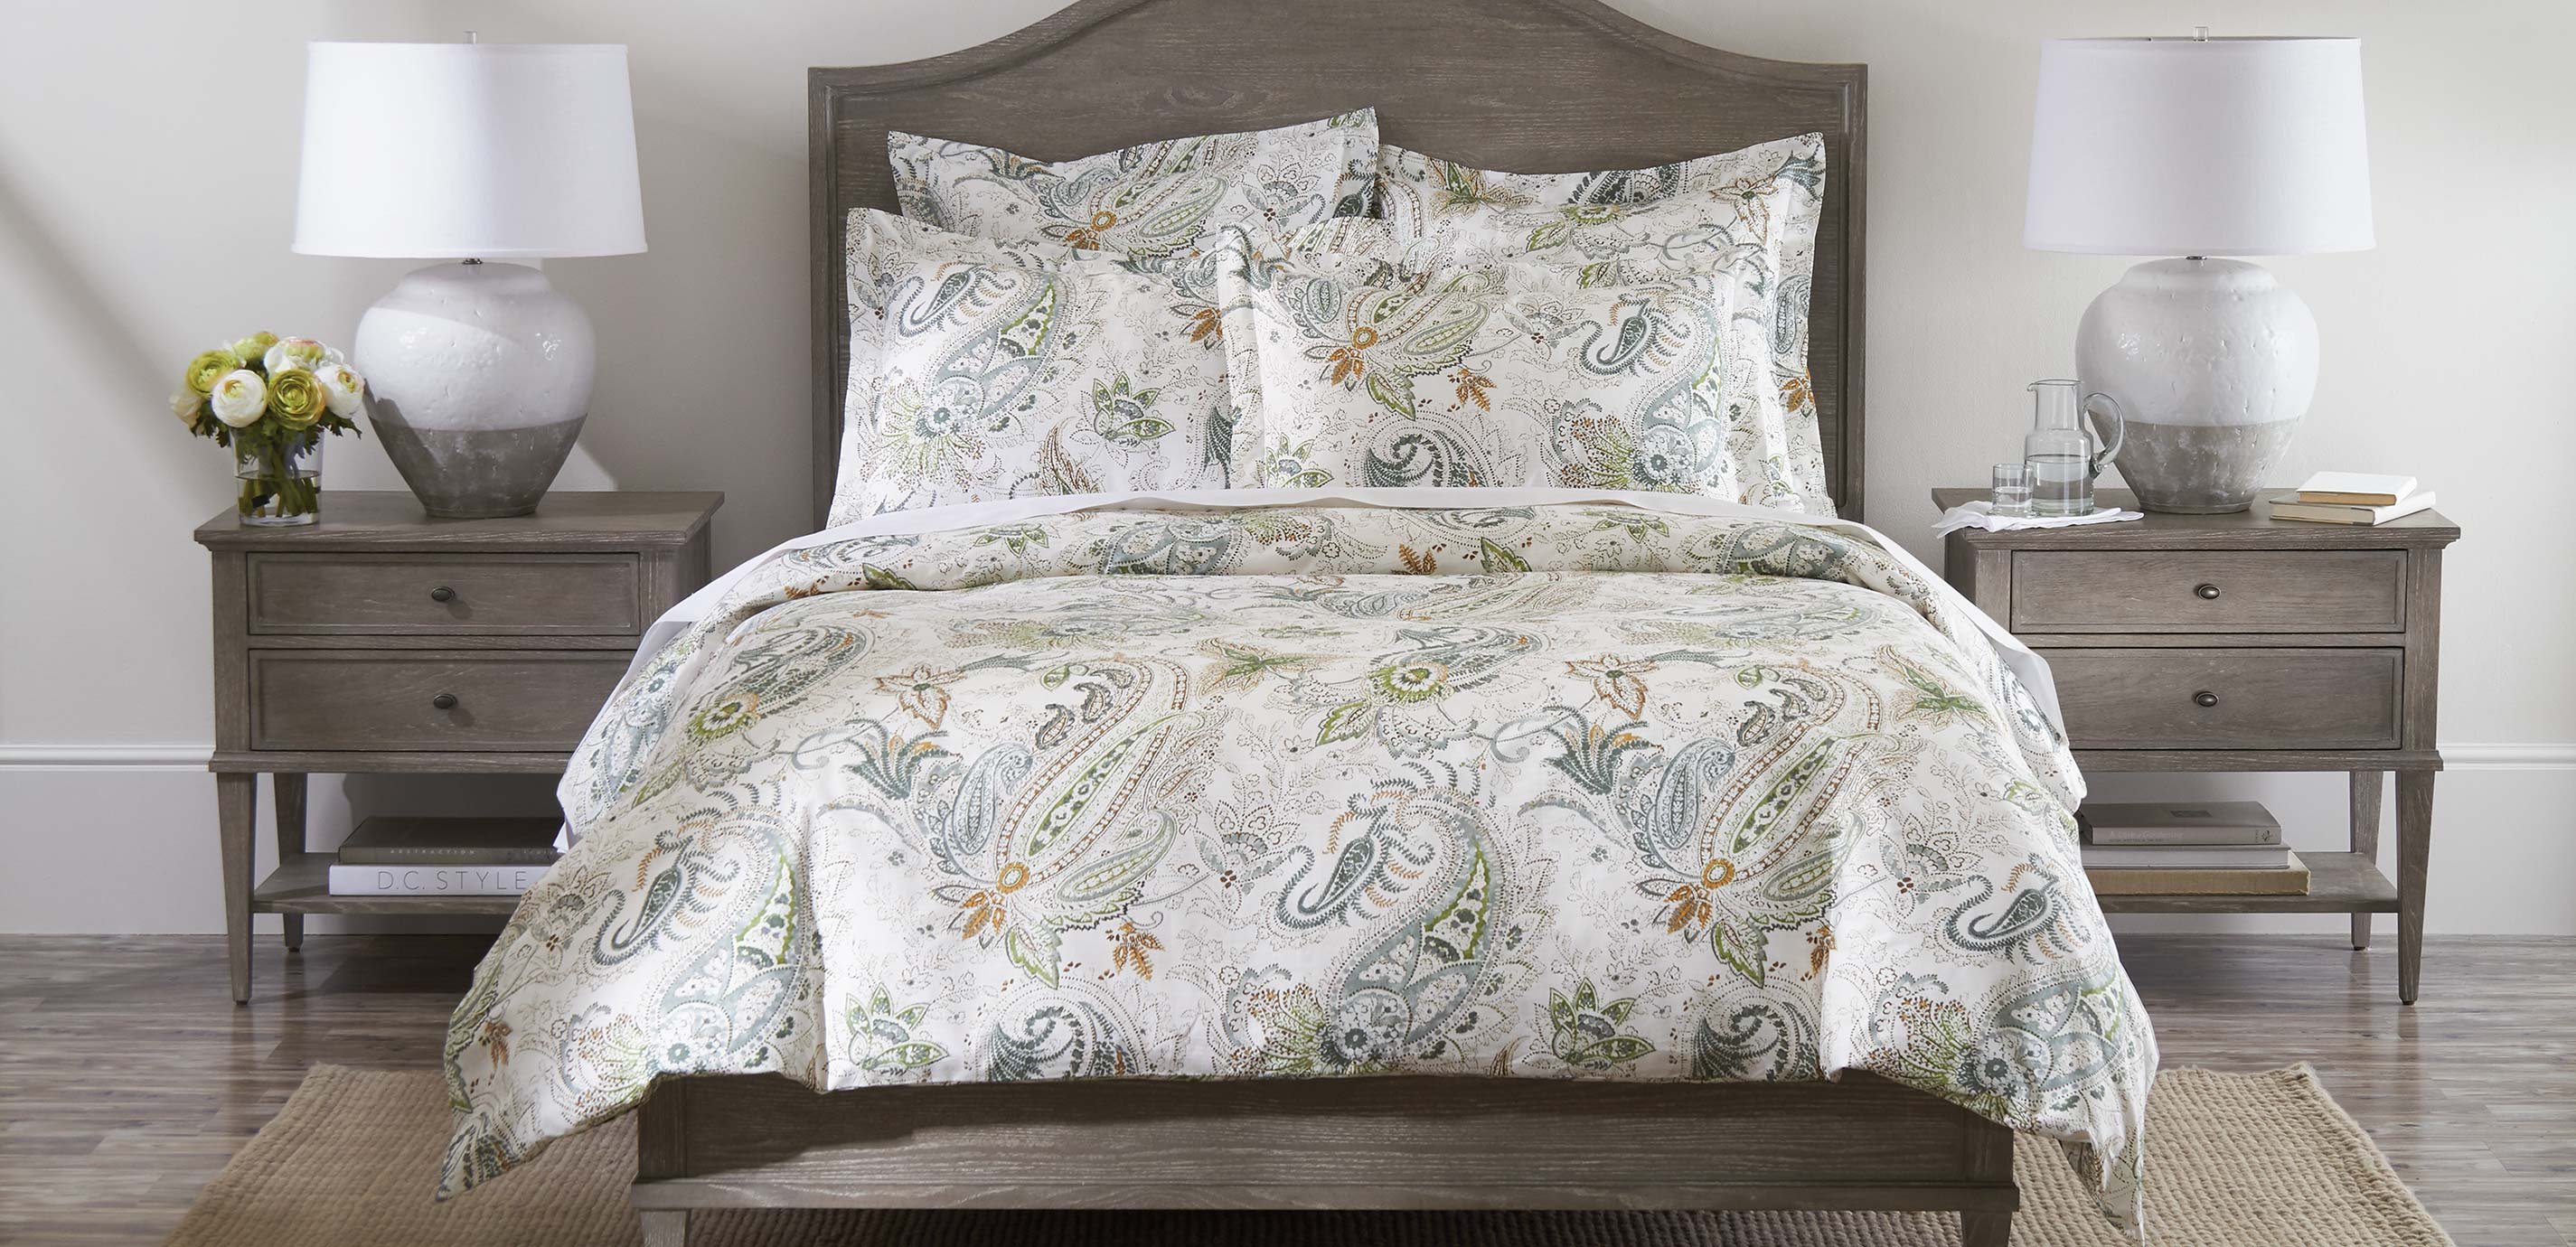 Spring Green Paisley Duvet Cover And, How Do You Get Duvet Covers To Stay In Place